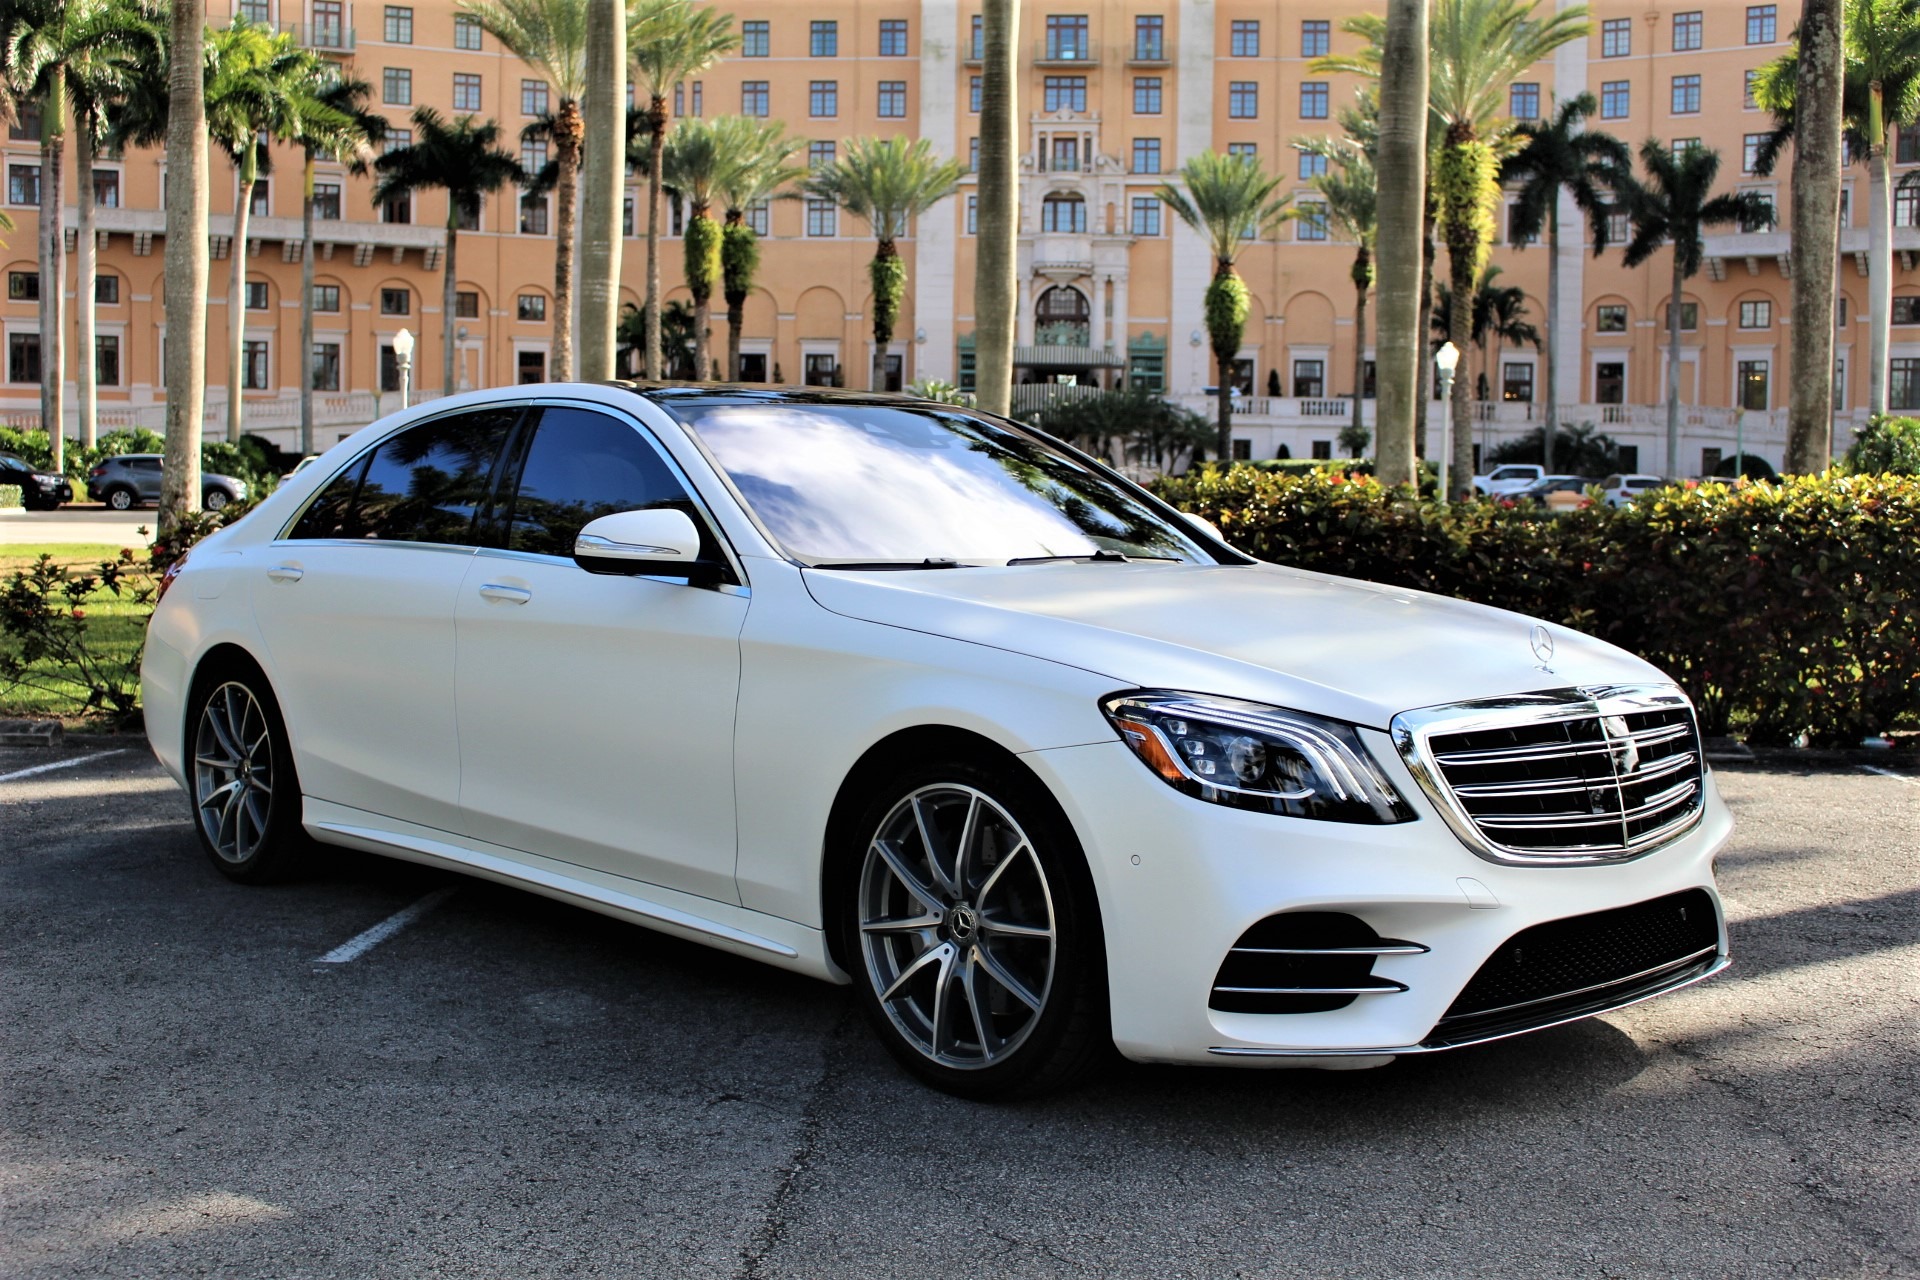 Used 2019 Mercedes-Benz S-Class S 560 for sale Sold at The Gables Sports Cars in Miami FL 33146 1